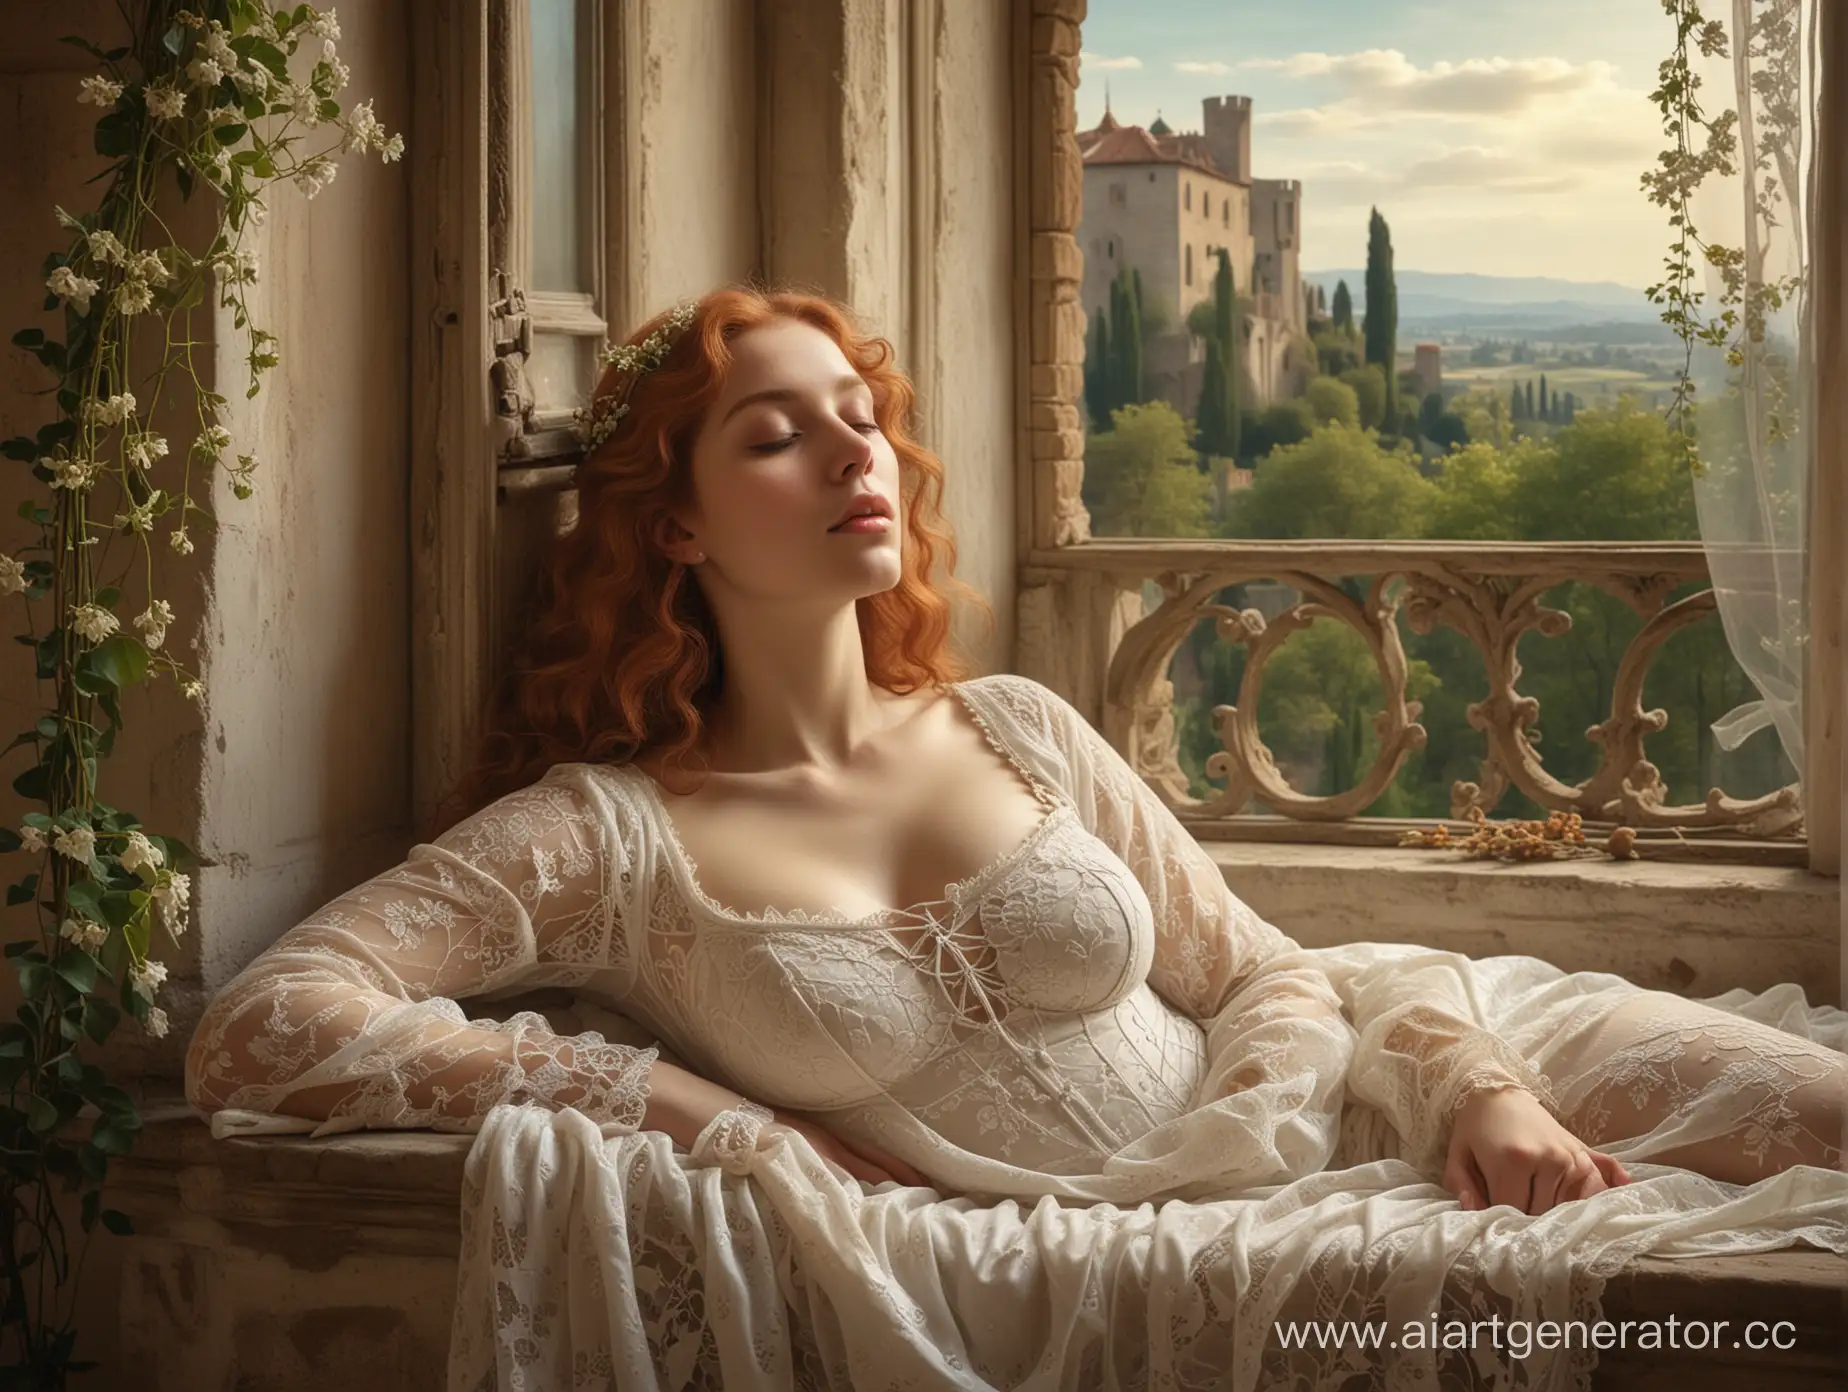 Medieval-Castle-Ambiance-with-Graceful-Lace-and-BotticelliStyle-Beauty